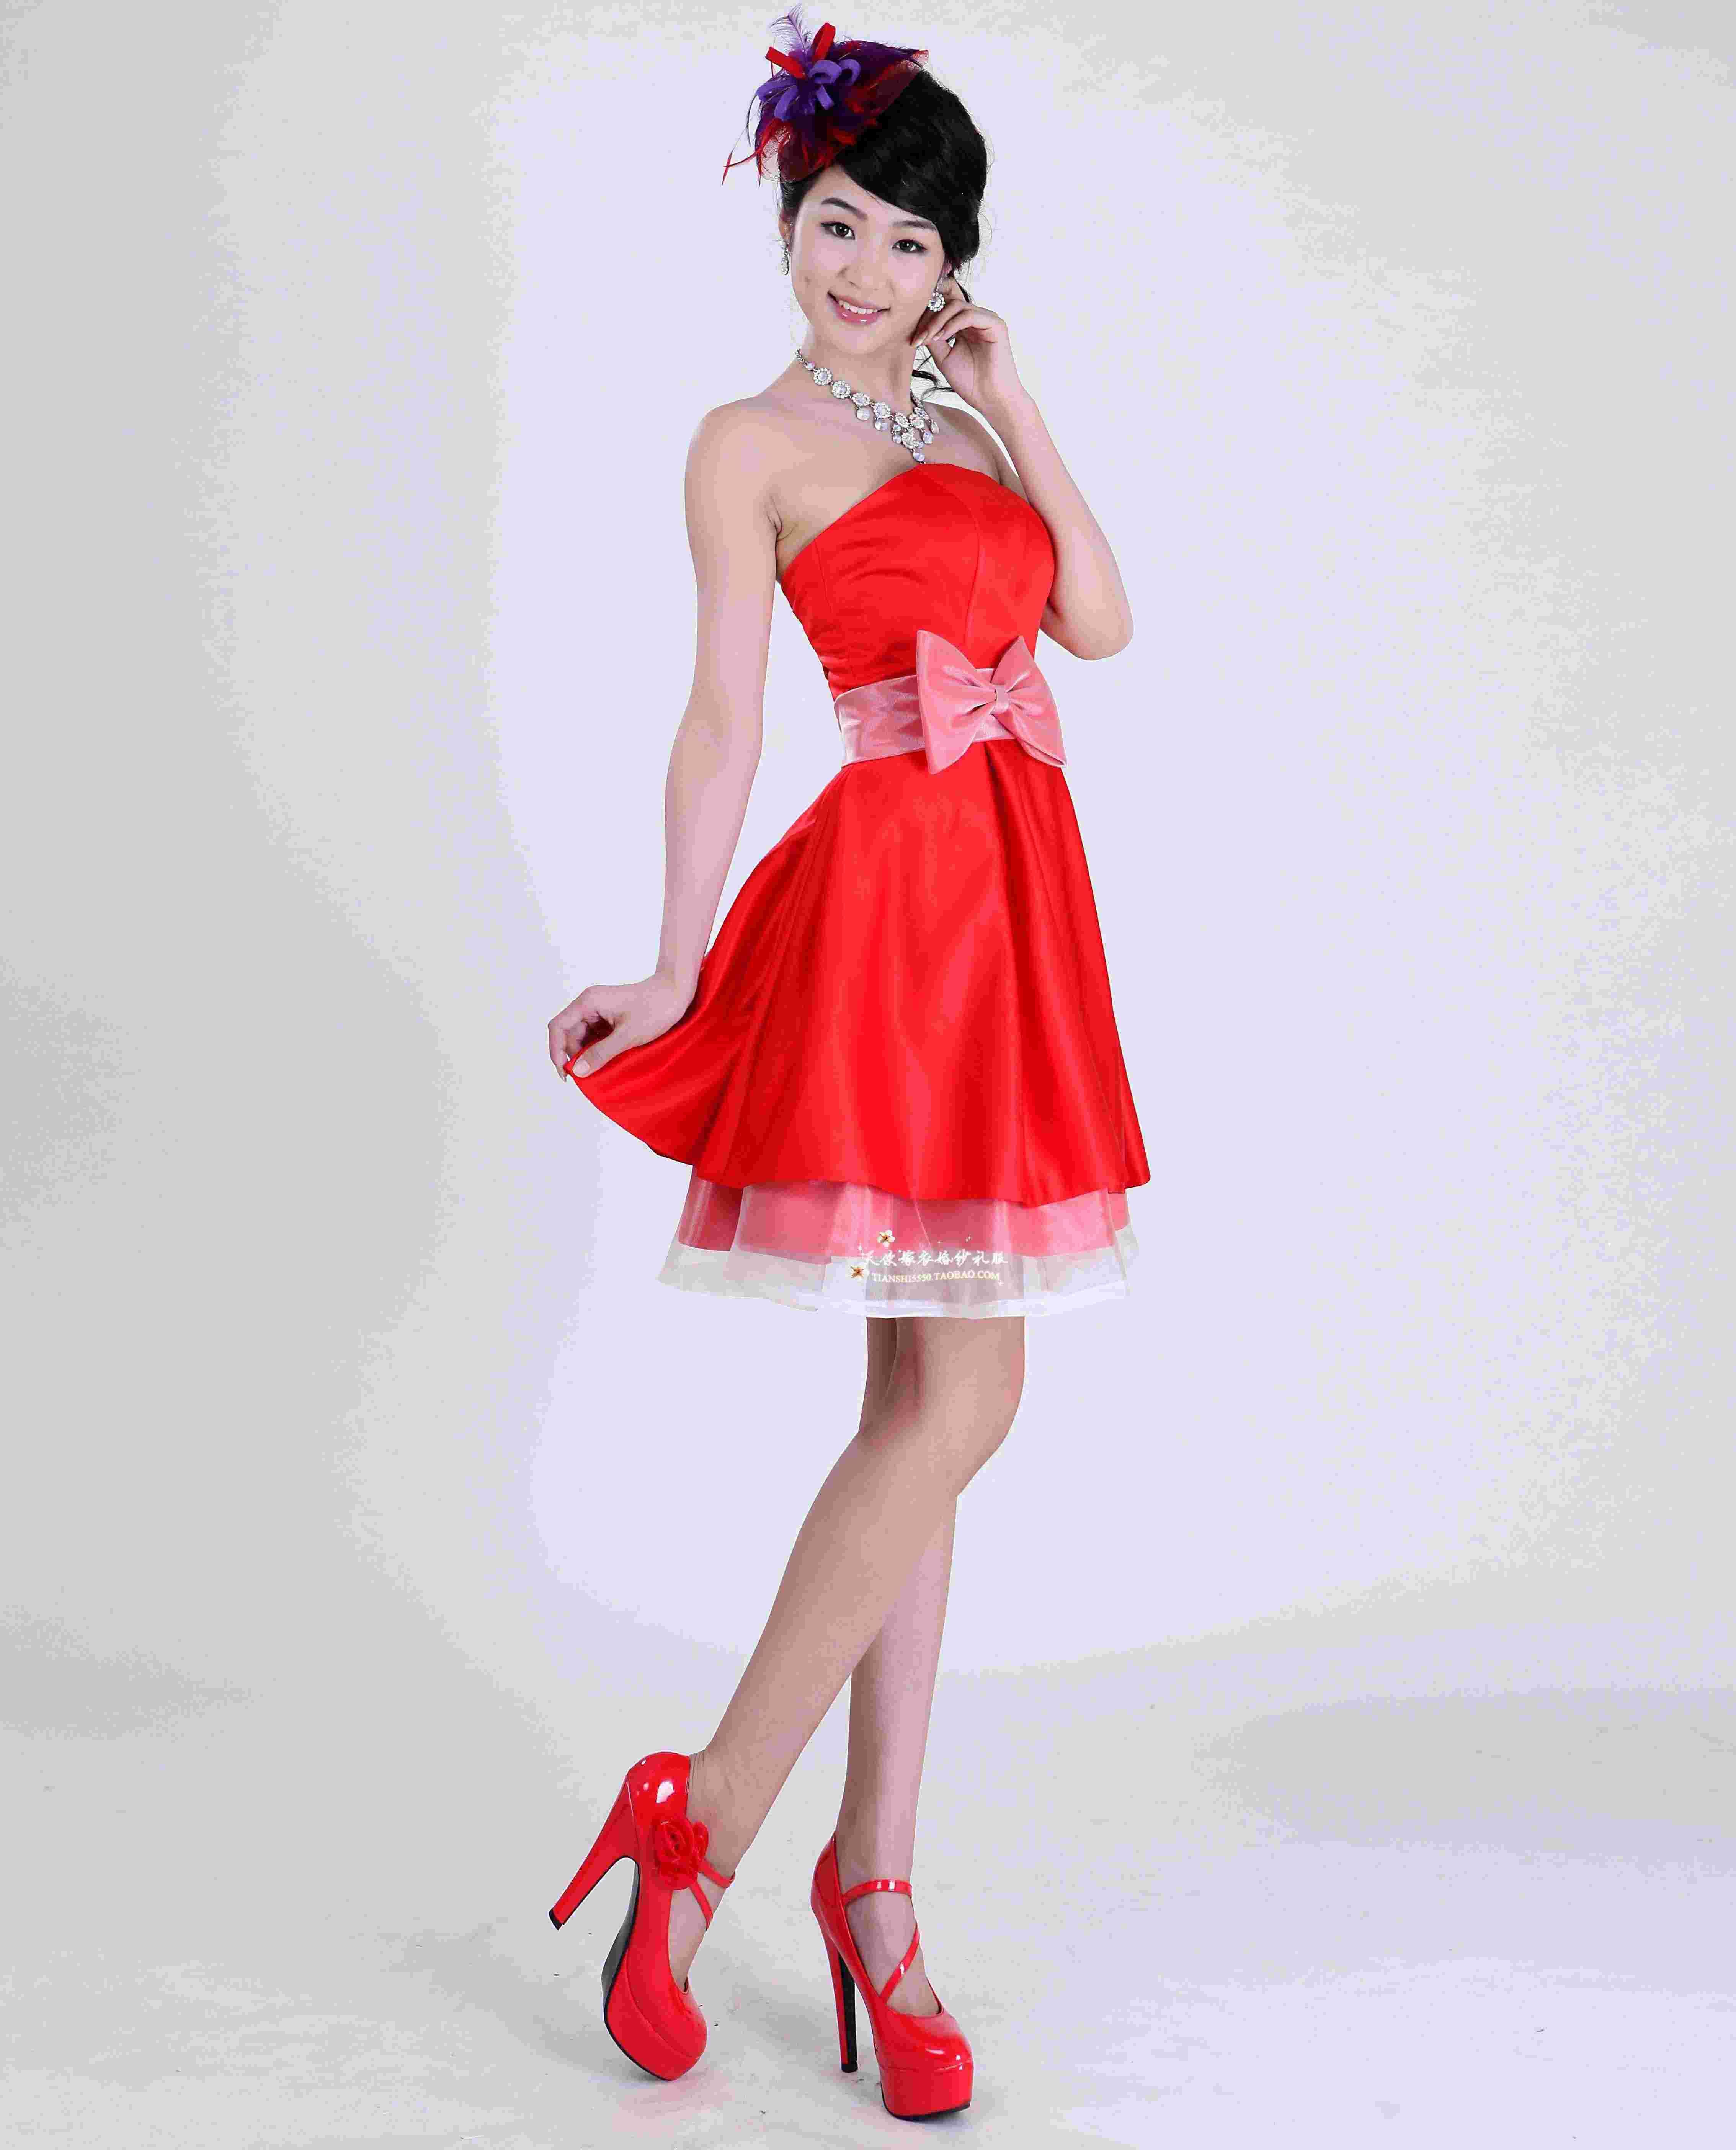 Red And White Short Bridesmaid Dresses - Wedding Dresses Colors